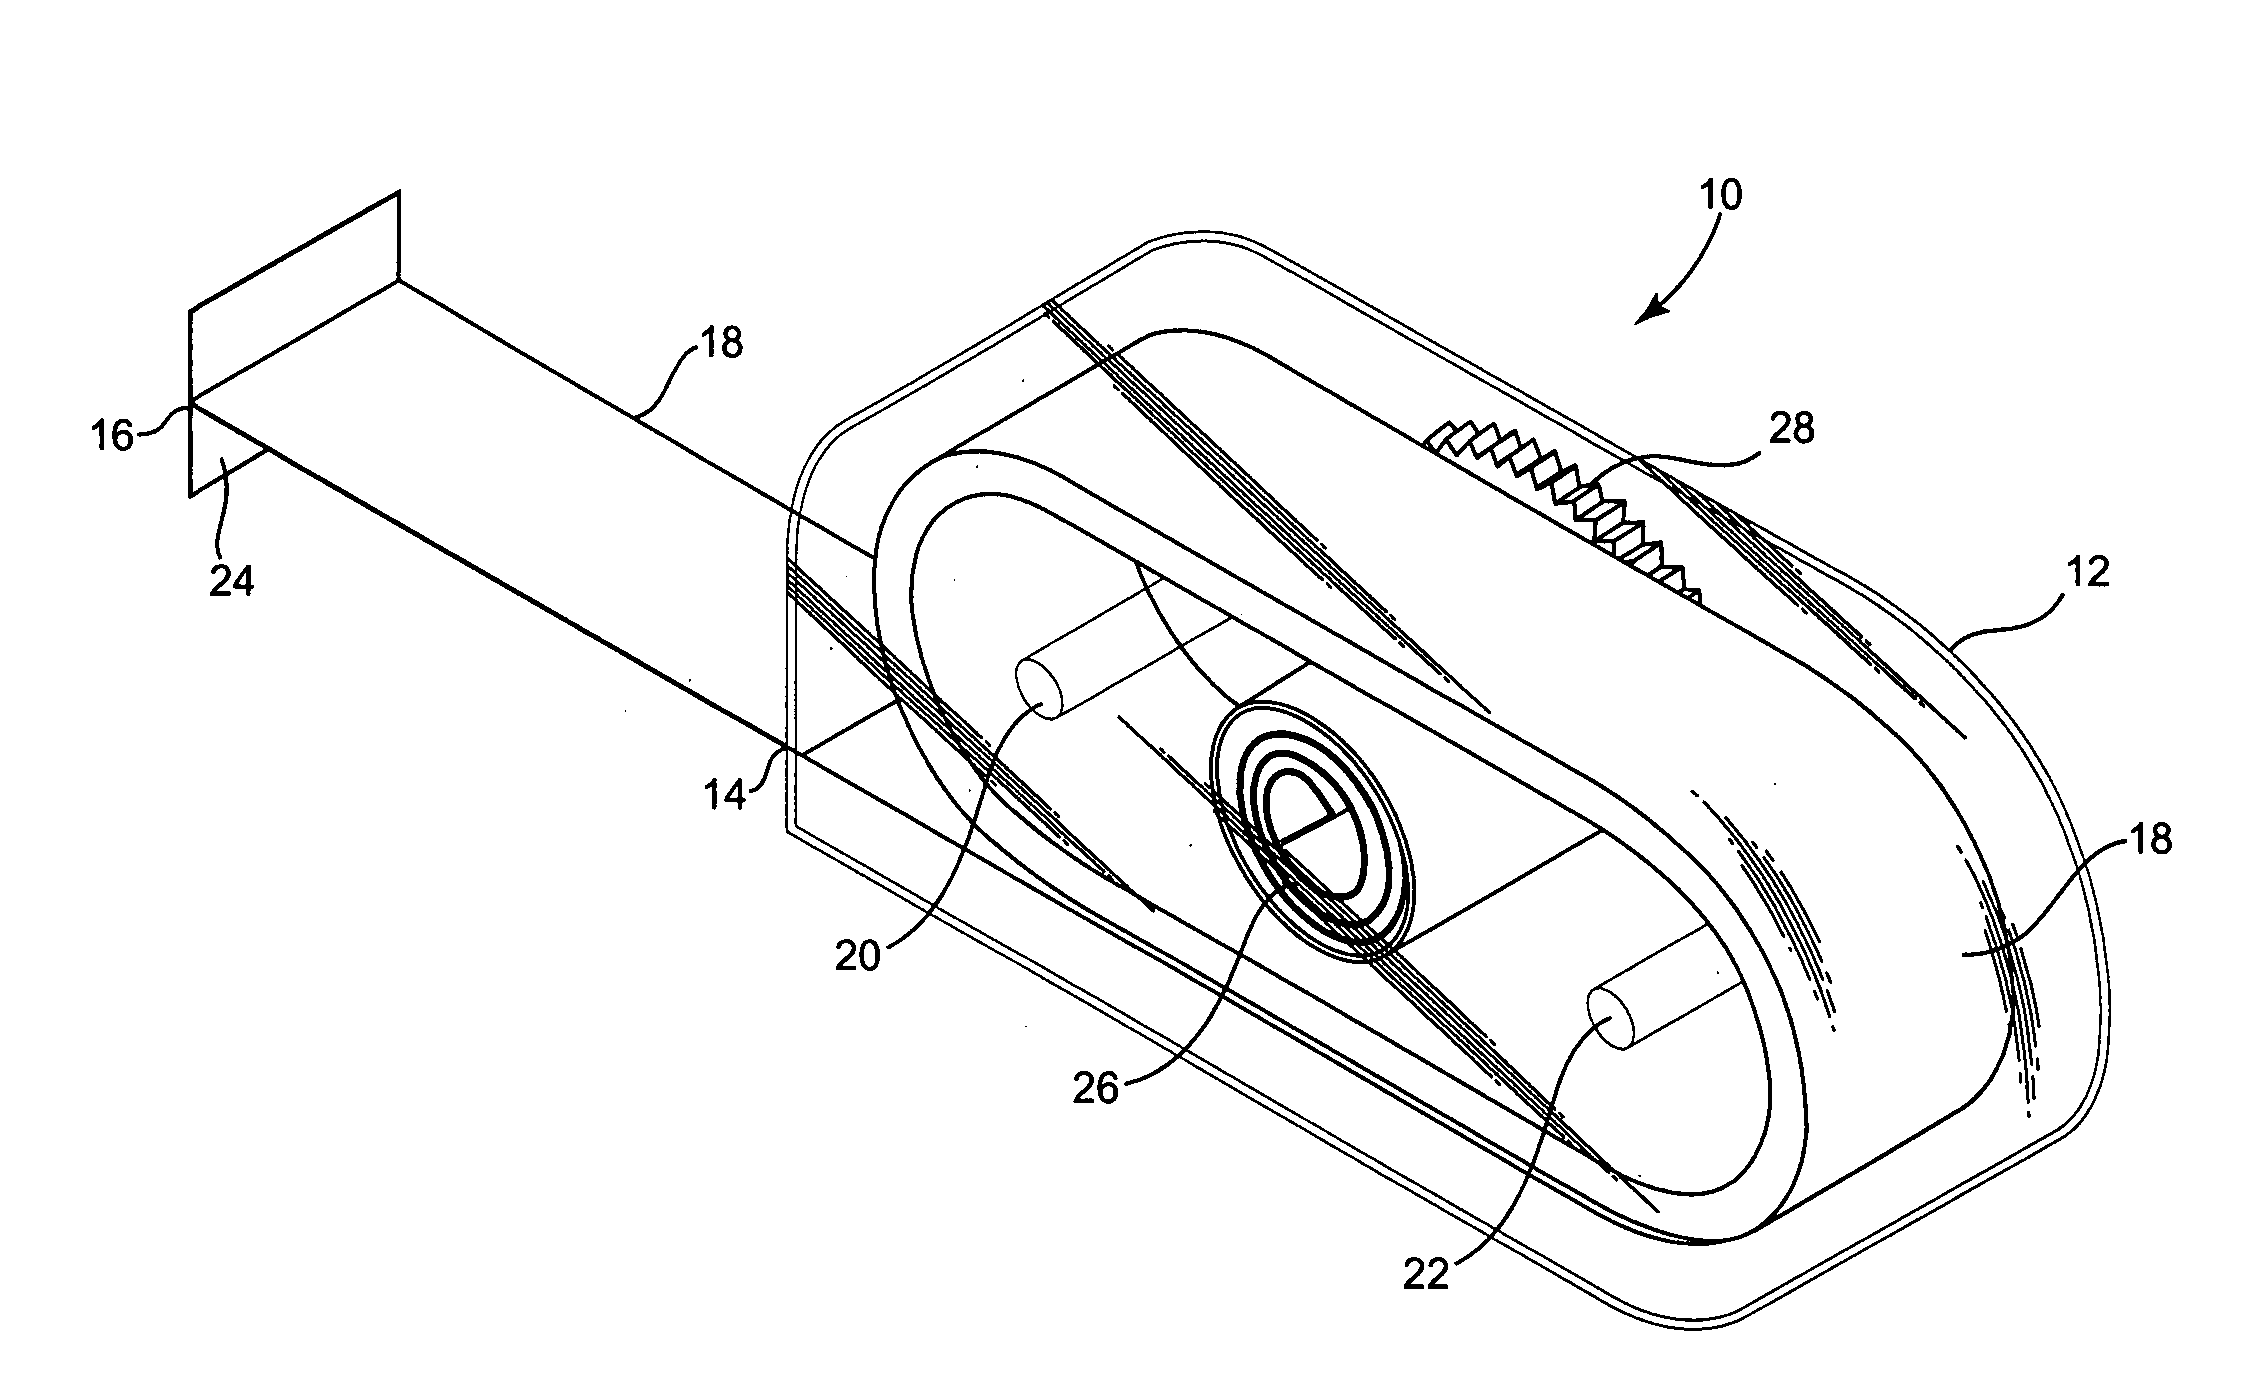 Measuring device having flexible tape coiled around a plurality of reels